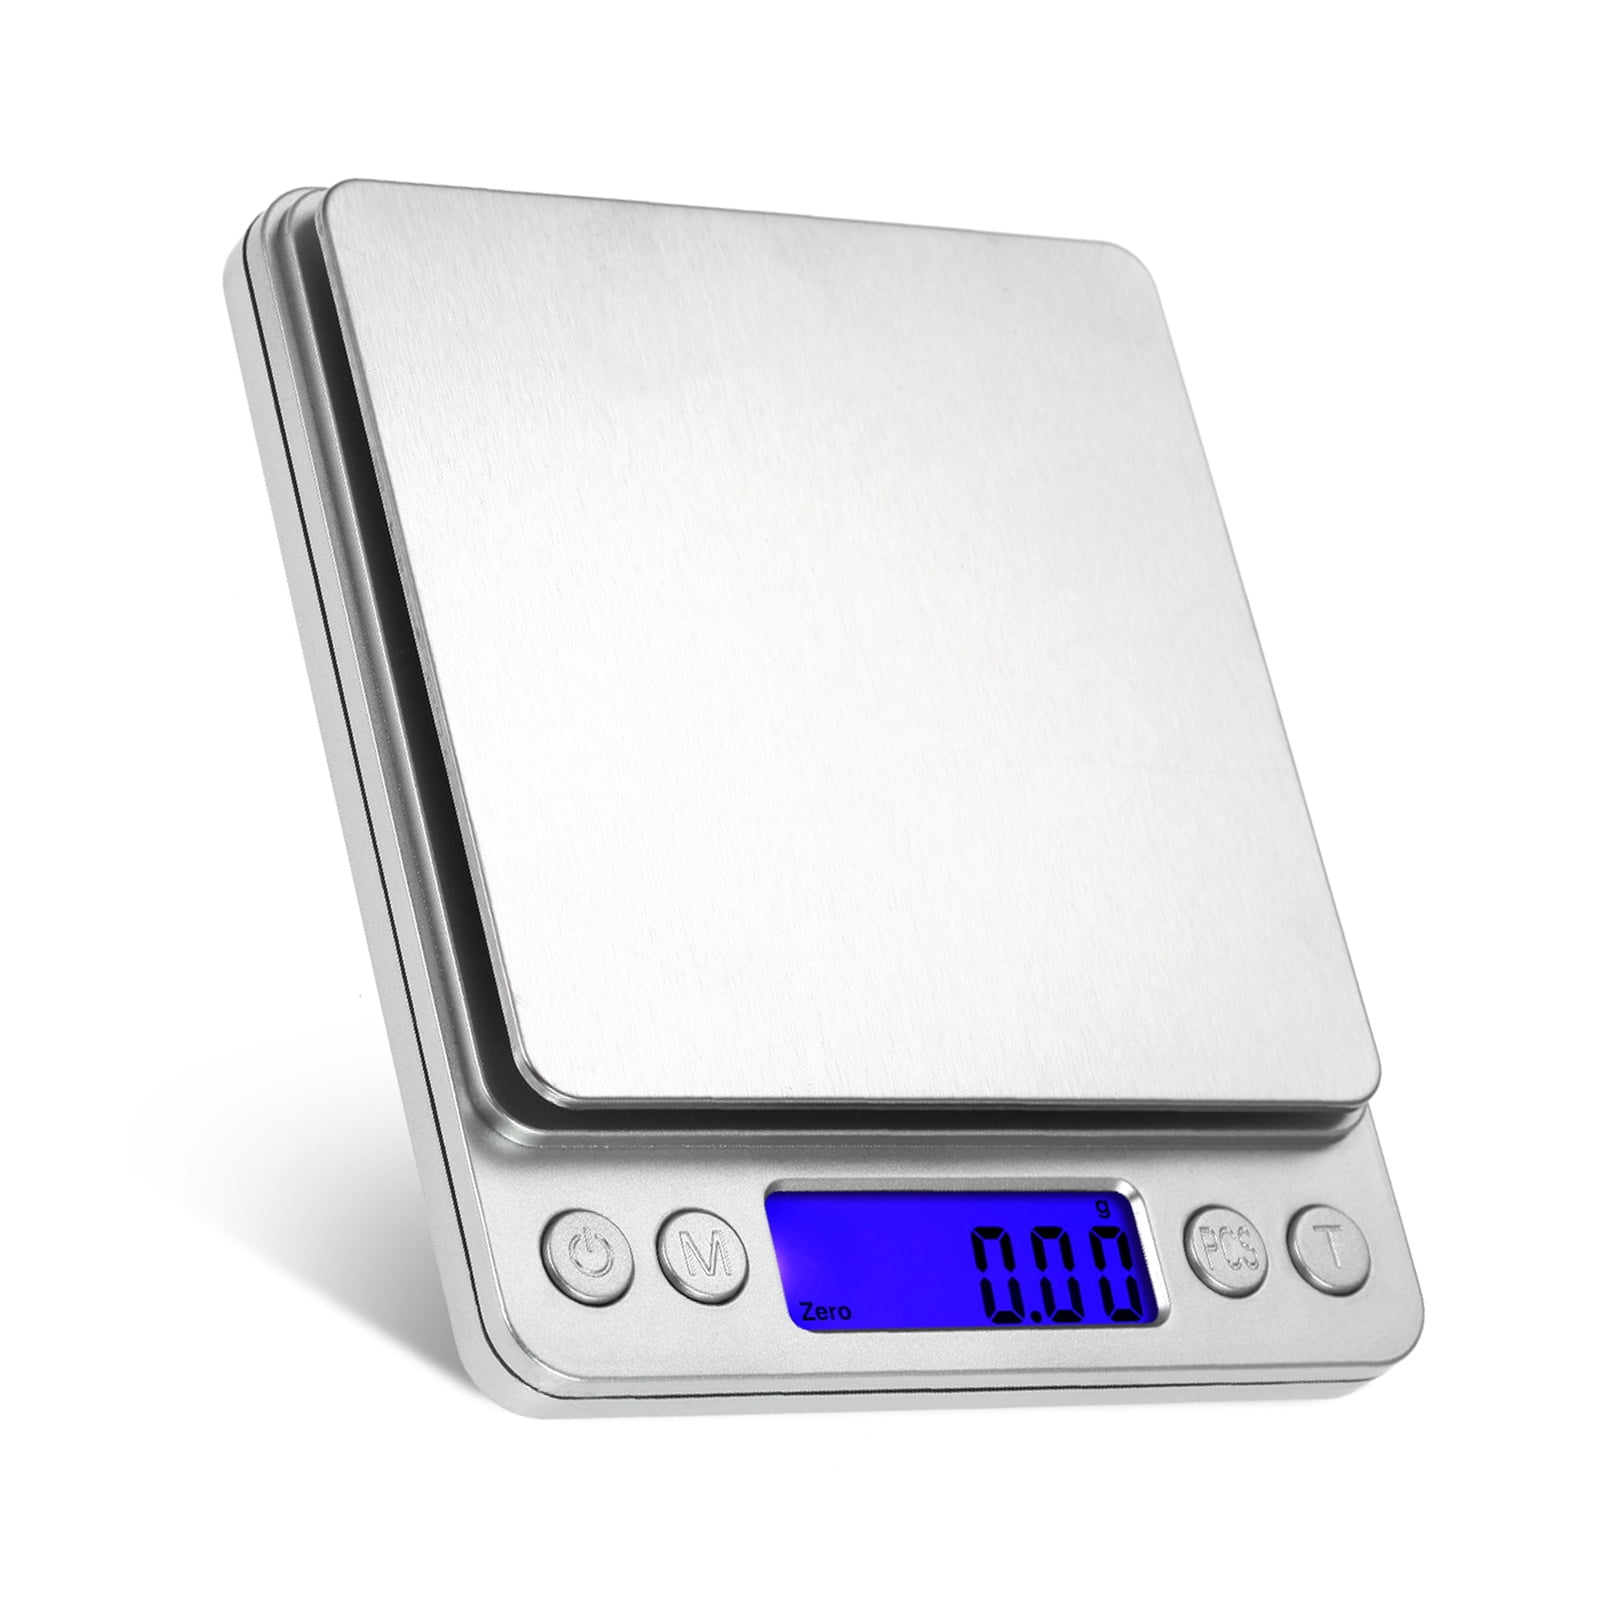 Rechargeable Electronic Kitchen Scales Kitchen Household Kitchen Food  Weighing Stainless Steel High Precision Digital scale - AliExpress